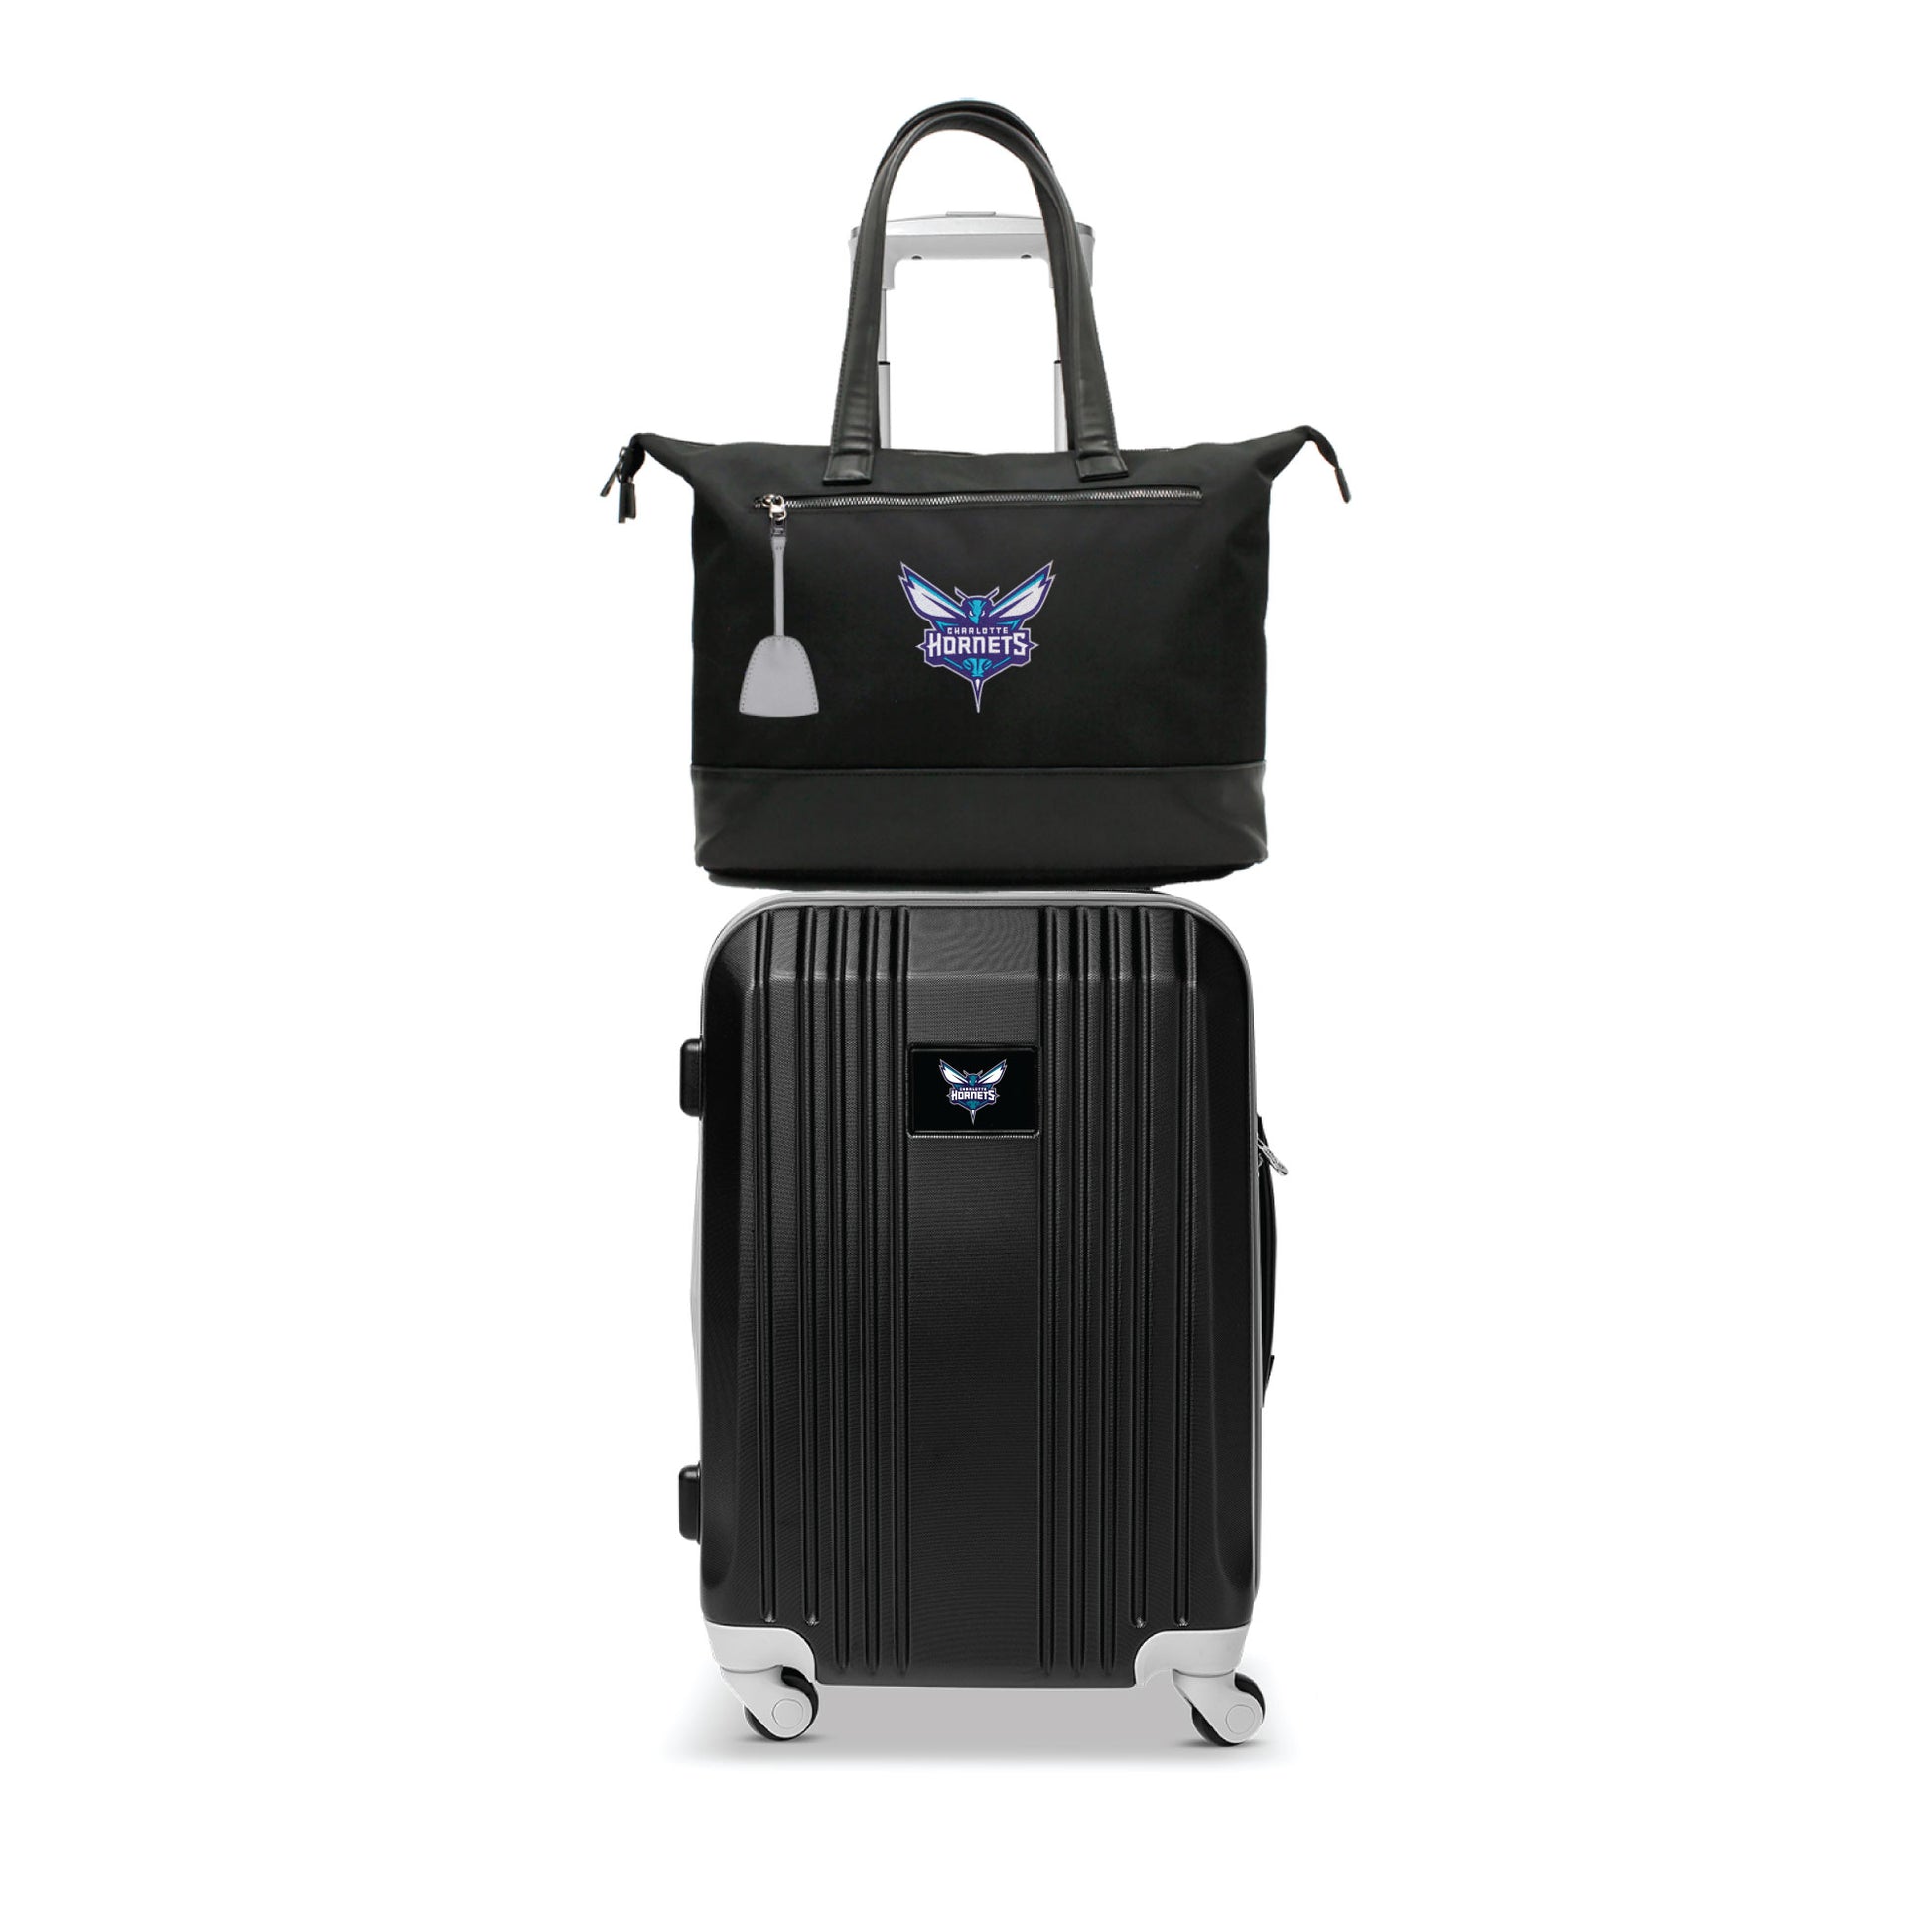 Charlotte Hornets Premium Laptop Tote Bag and Luggage Set